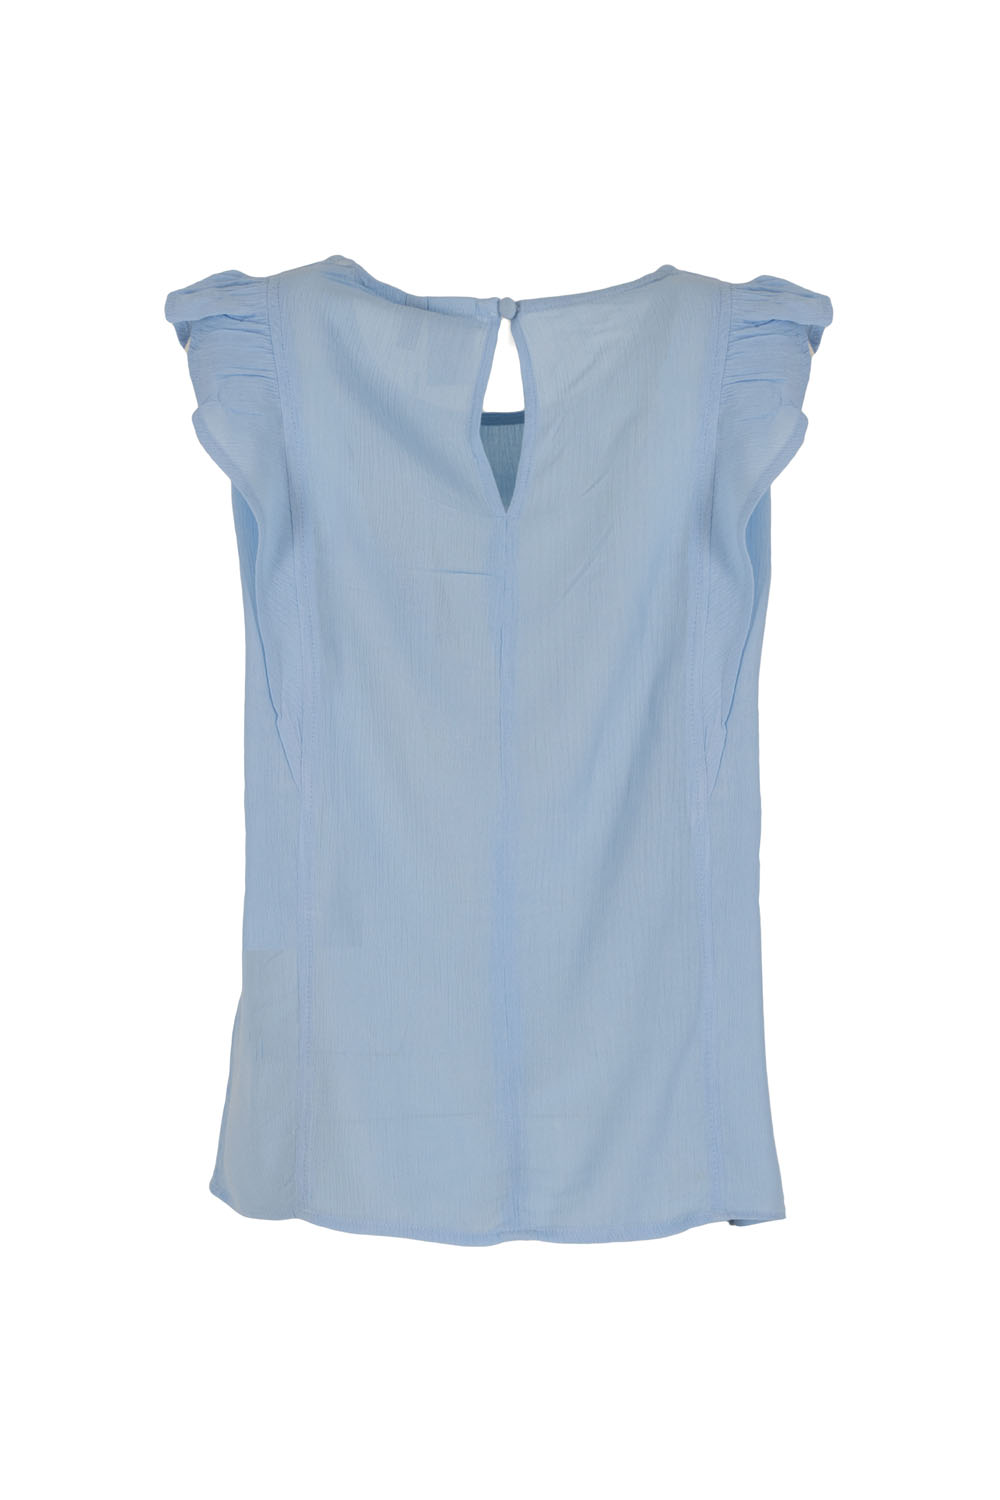 Sleeveless Textured Top with Frills